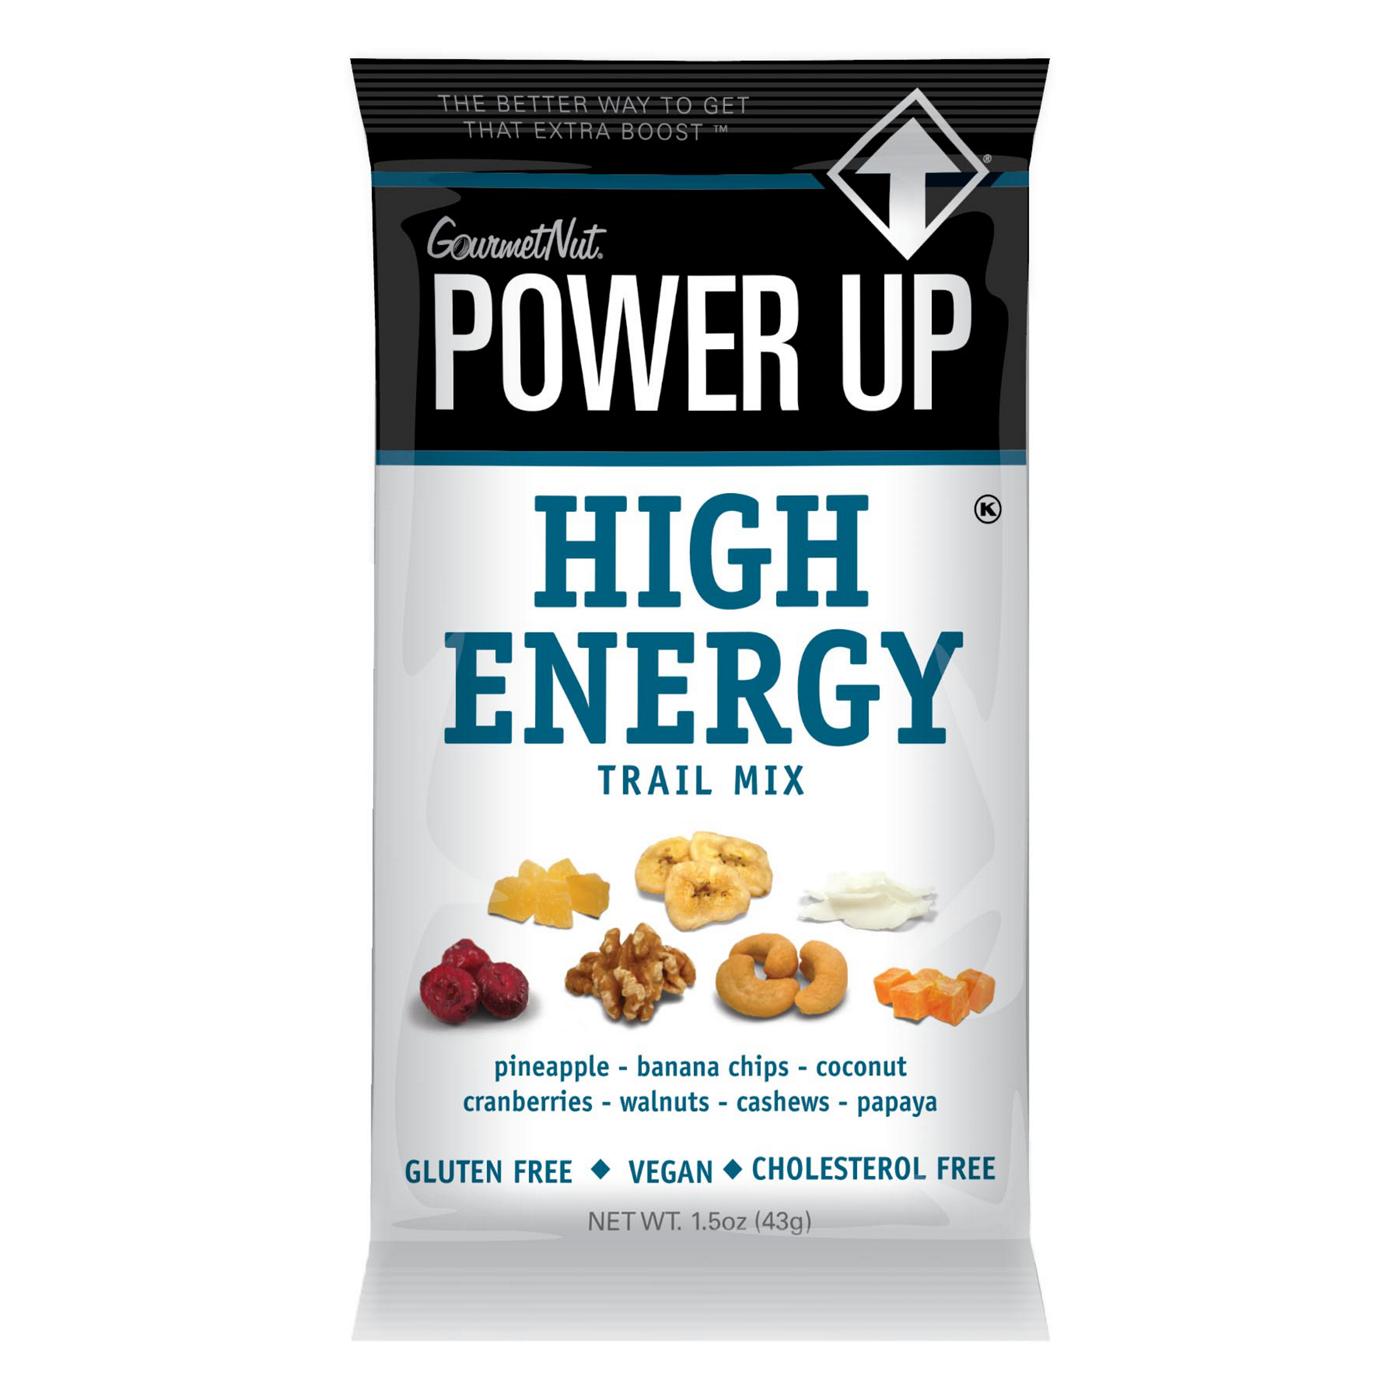 Power Up High Energy Trail Mix; image 2 of 3